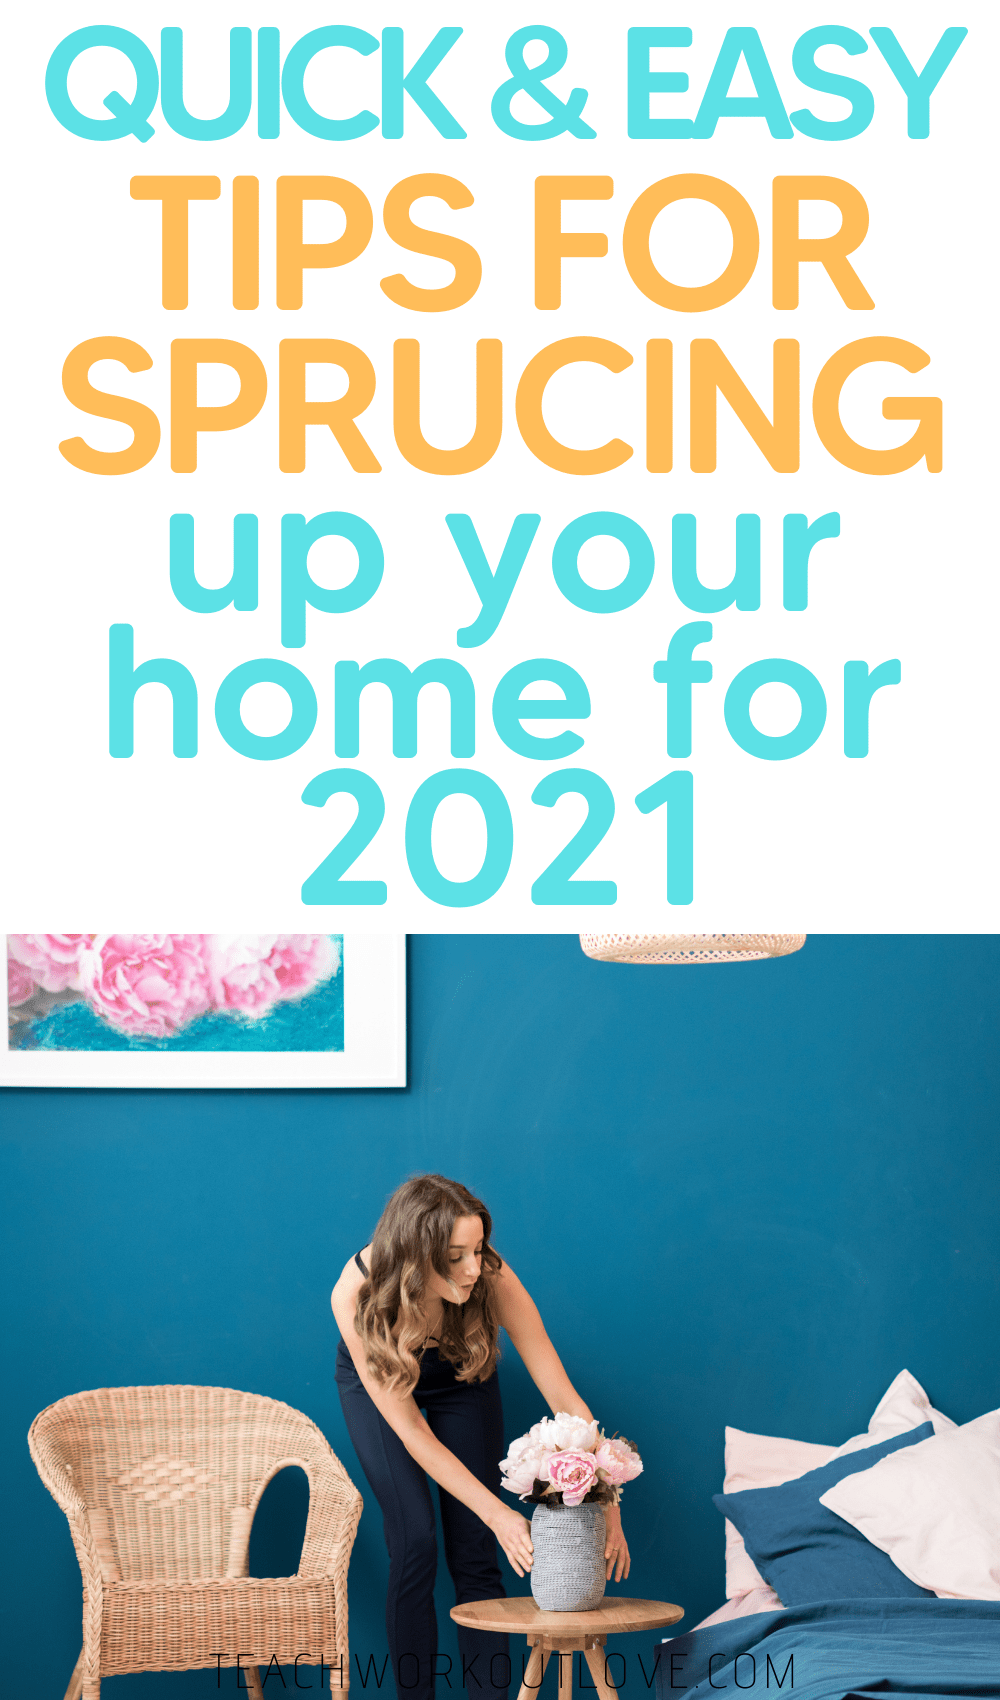 The new year is approaching and it's time to make some changes! Here's the latest tips on how to spruce up your home for 2021.